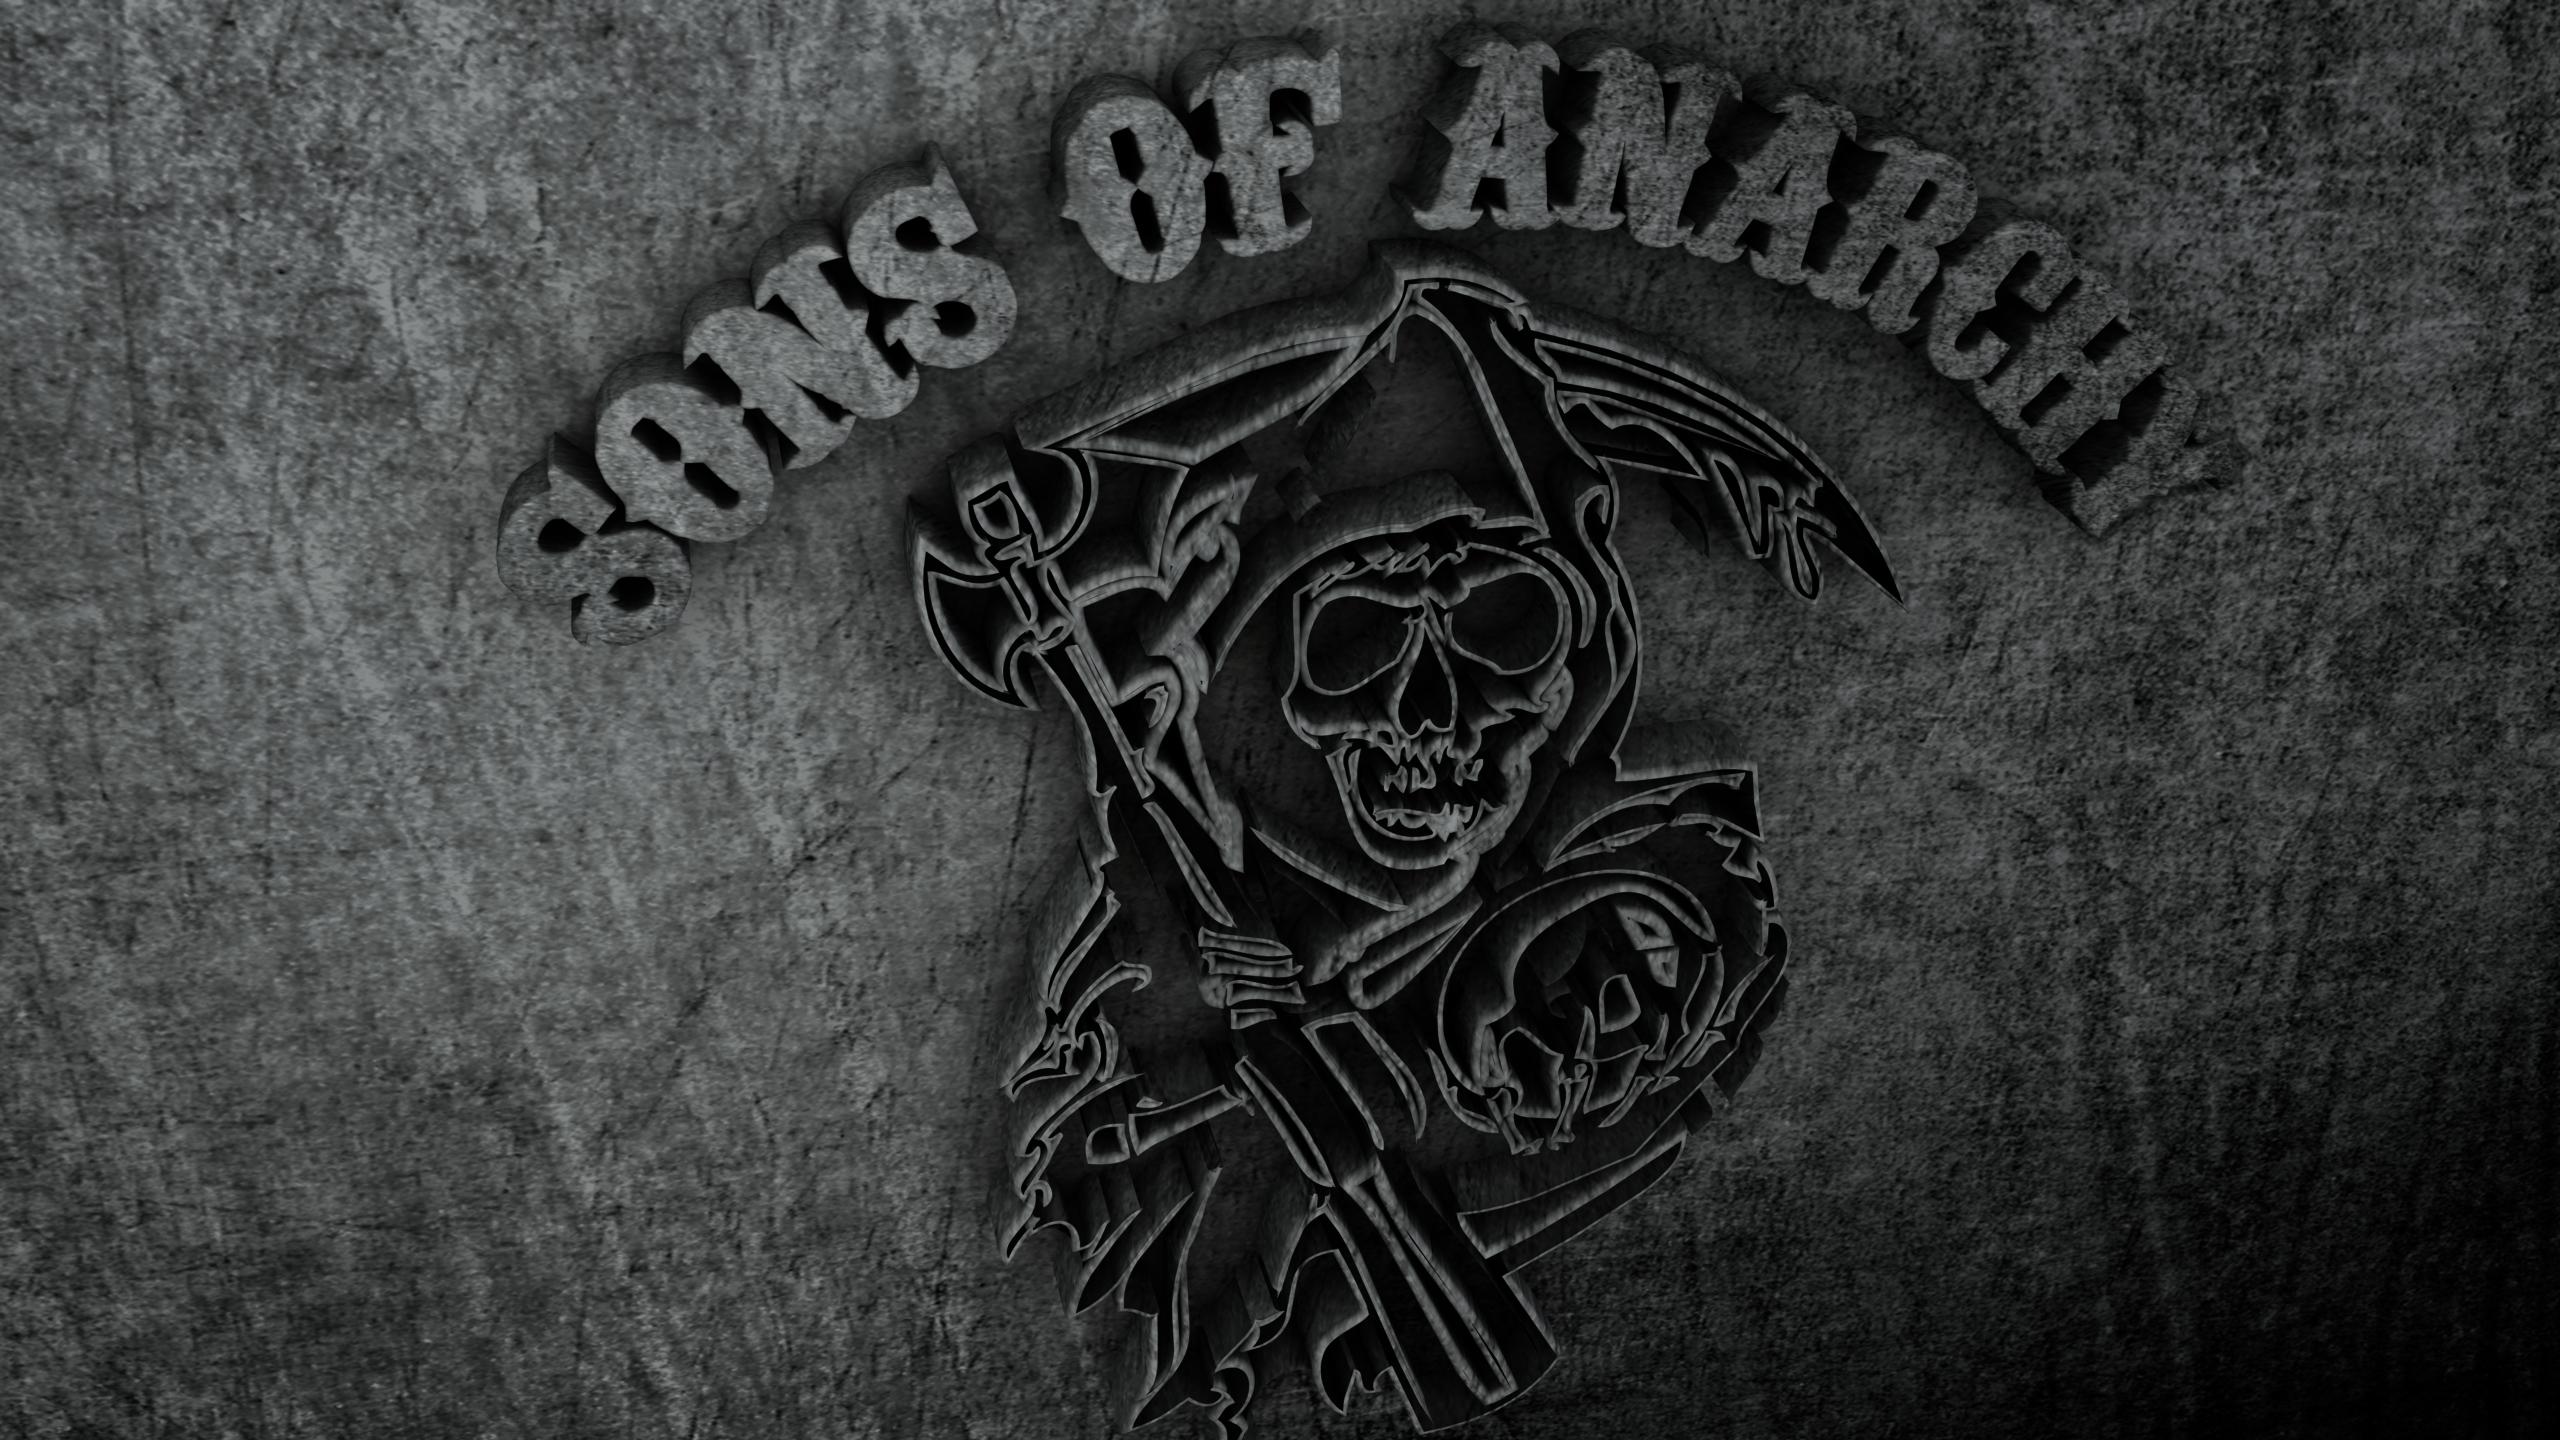 2560 x 1440 · png - Sons of Anarchy Logo Wallpapers Free download | PixelsTalk